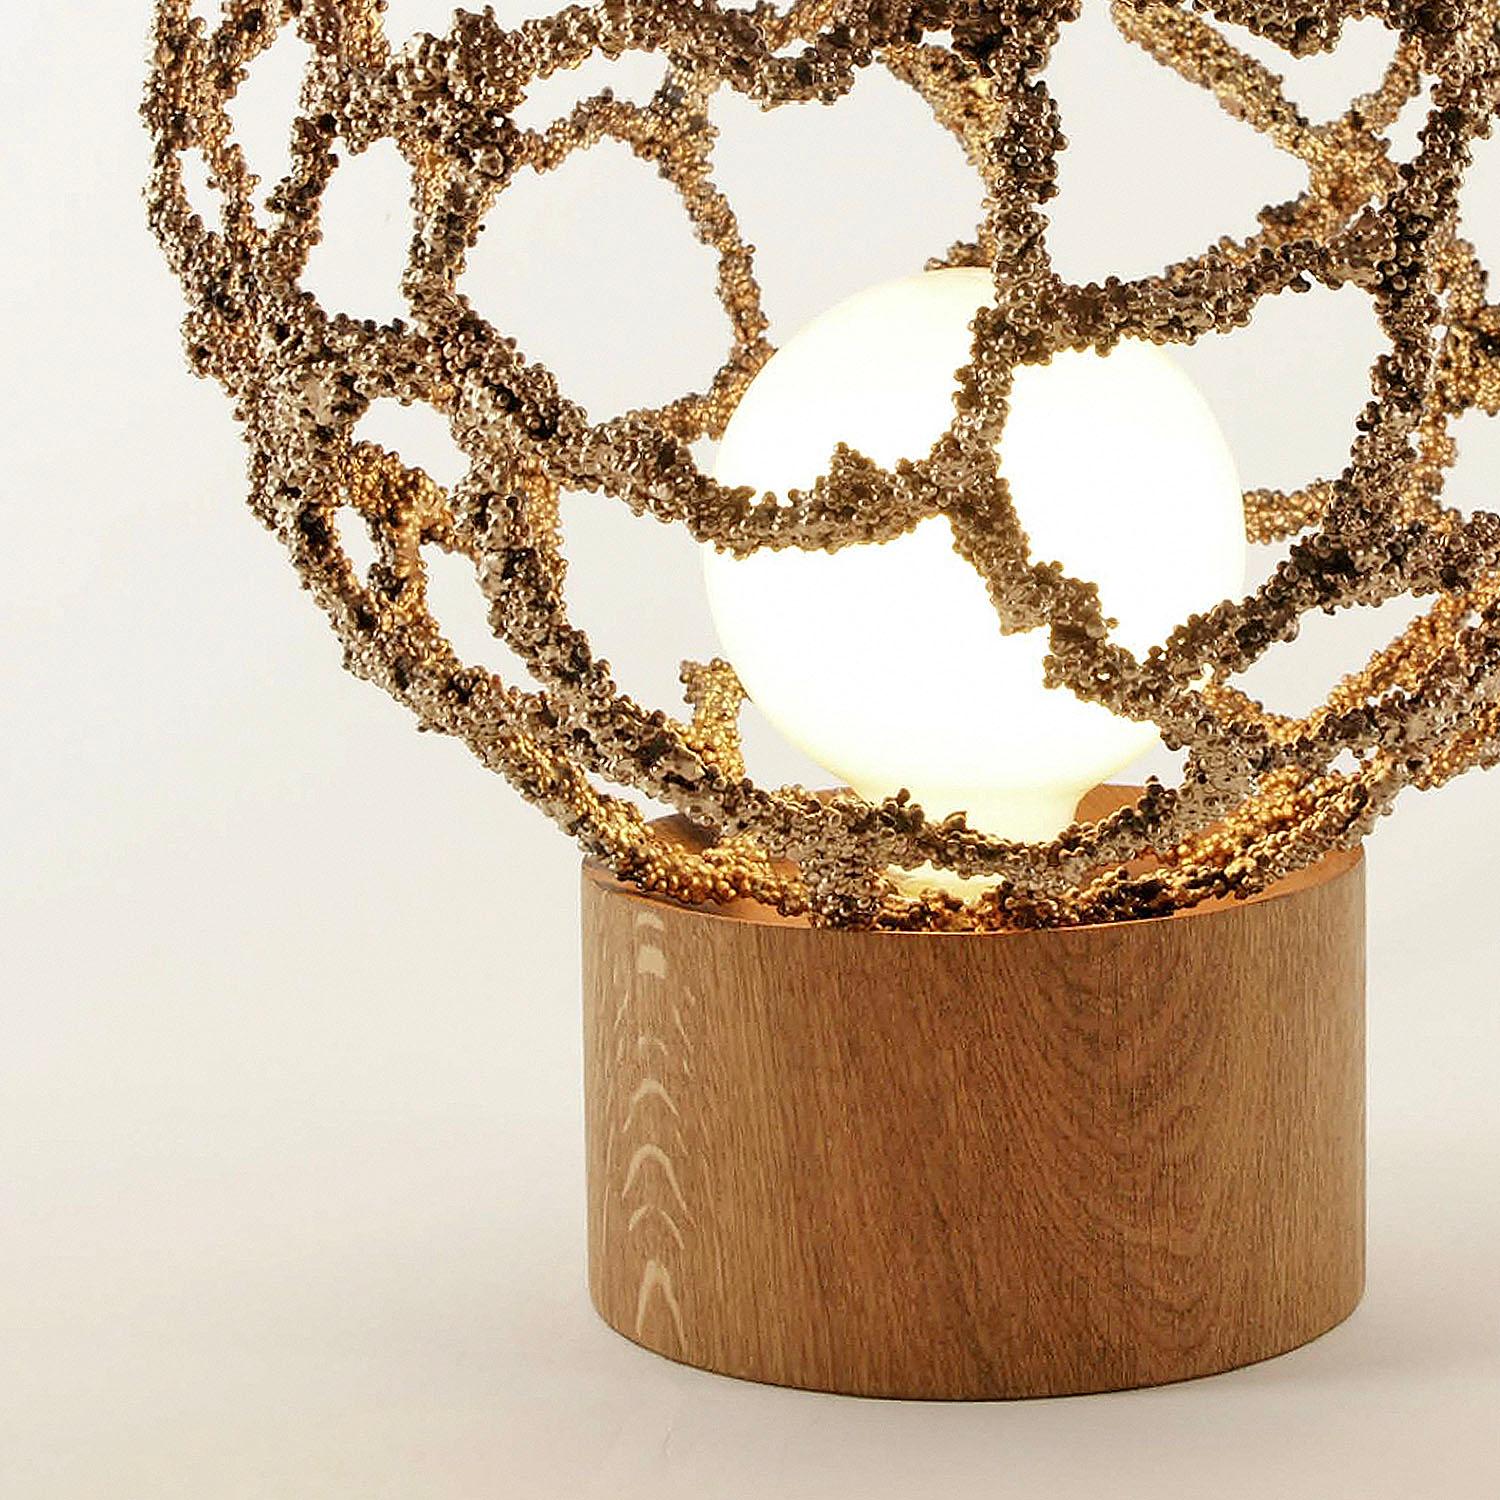 Contemporary brass table lamp - Core table light by Johannes Hemann

Material: Steel, Brass, Oak
Dimensions: Ø 30 x H 40 cm

Just like the universe is made from smallest parts, the atoms, Core has been built from small beads. It is an